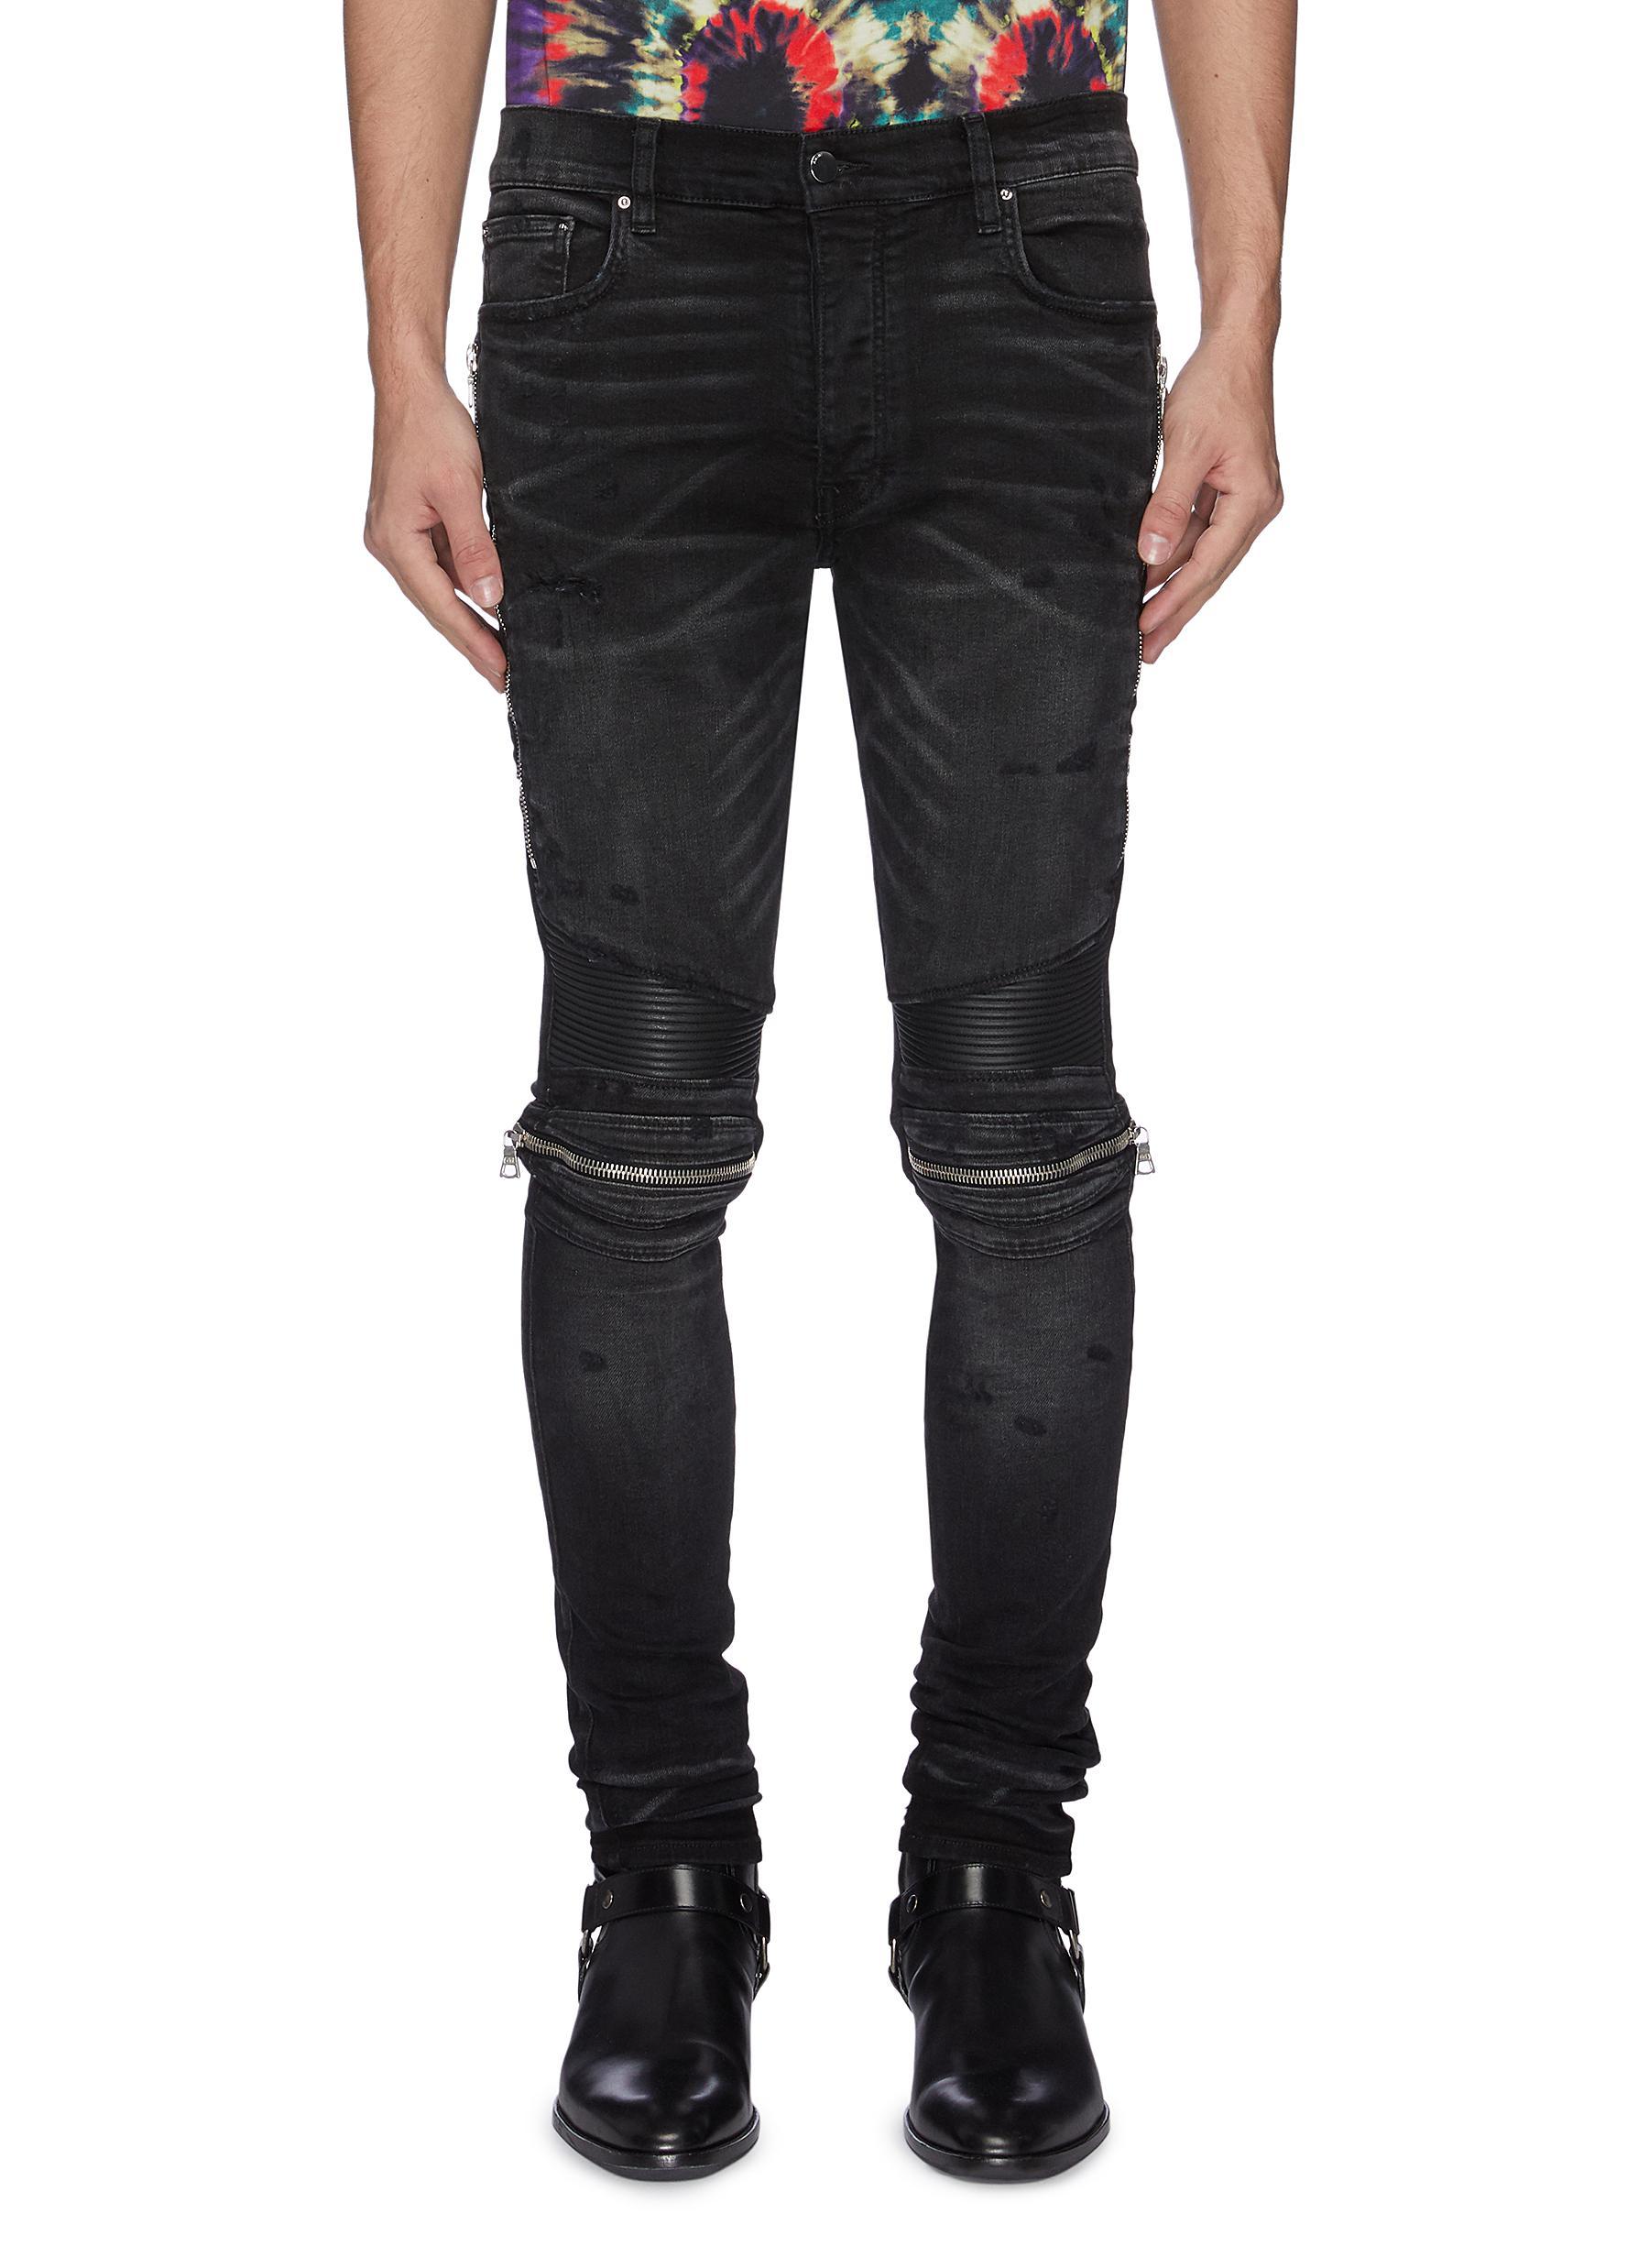 Amiri 'mx2' Pleated Leather Patch Jeans in Grey (Gray) for Men - Lyst